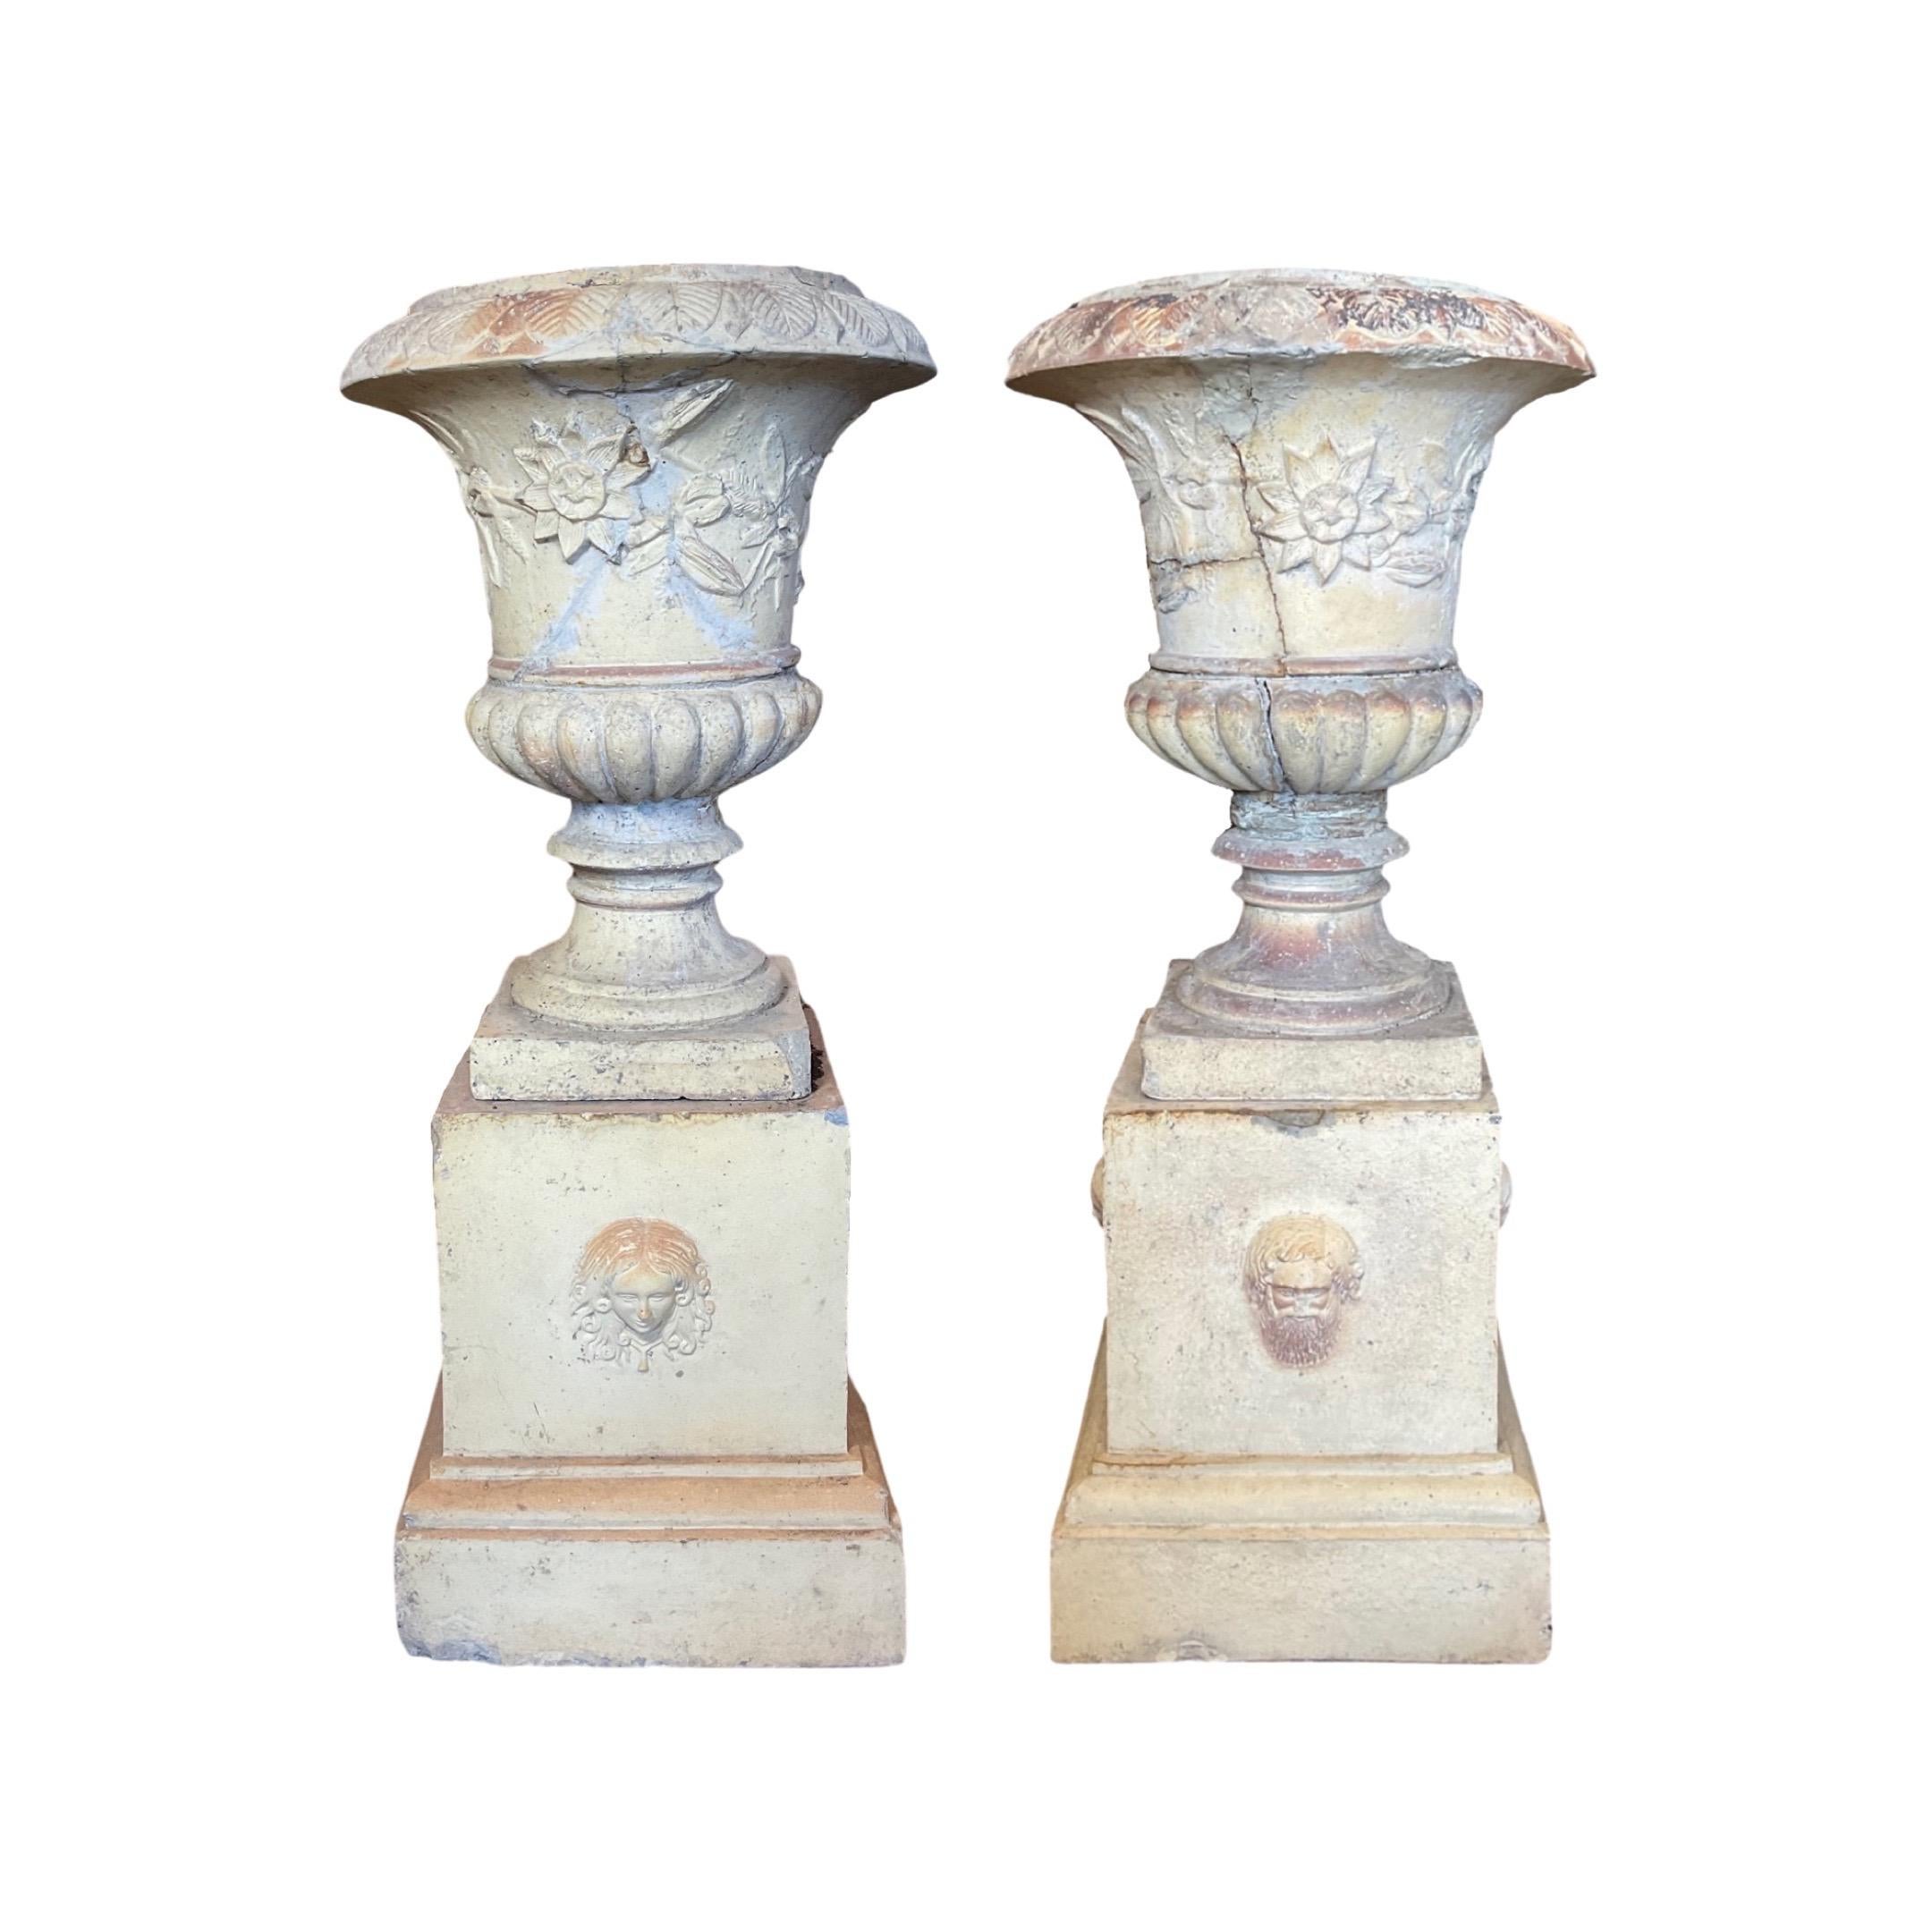 This pair of French Terracotta Planters comes with both the planters and the base, giving you a complete look for your garden. Crafted in 1890, they are made out of terracotta for a durable yet elegant design. Perfect for a flower or herb garden,